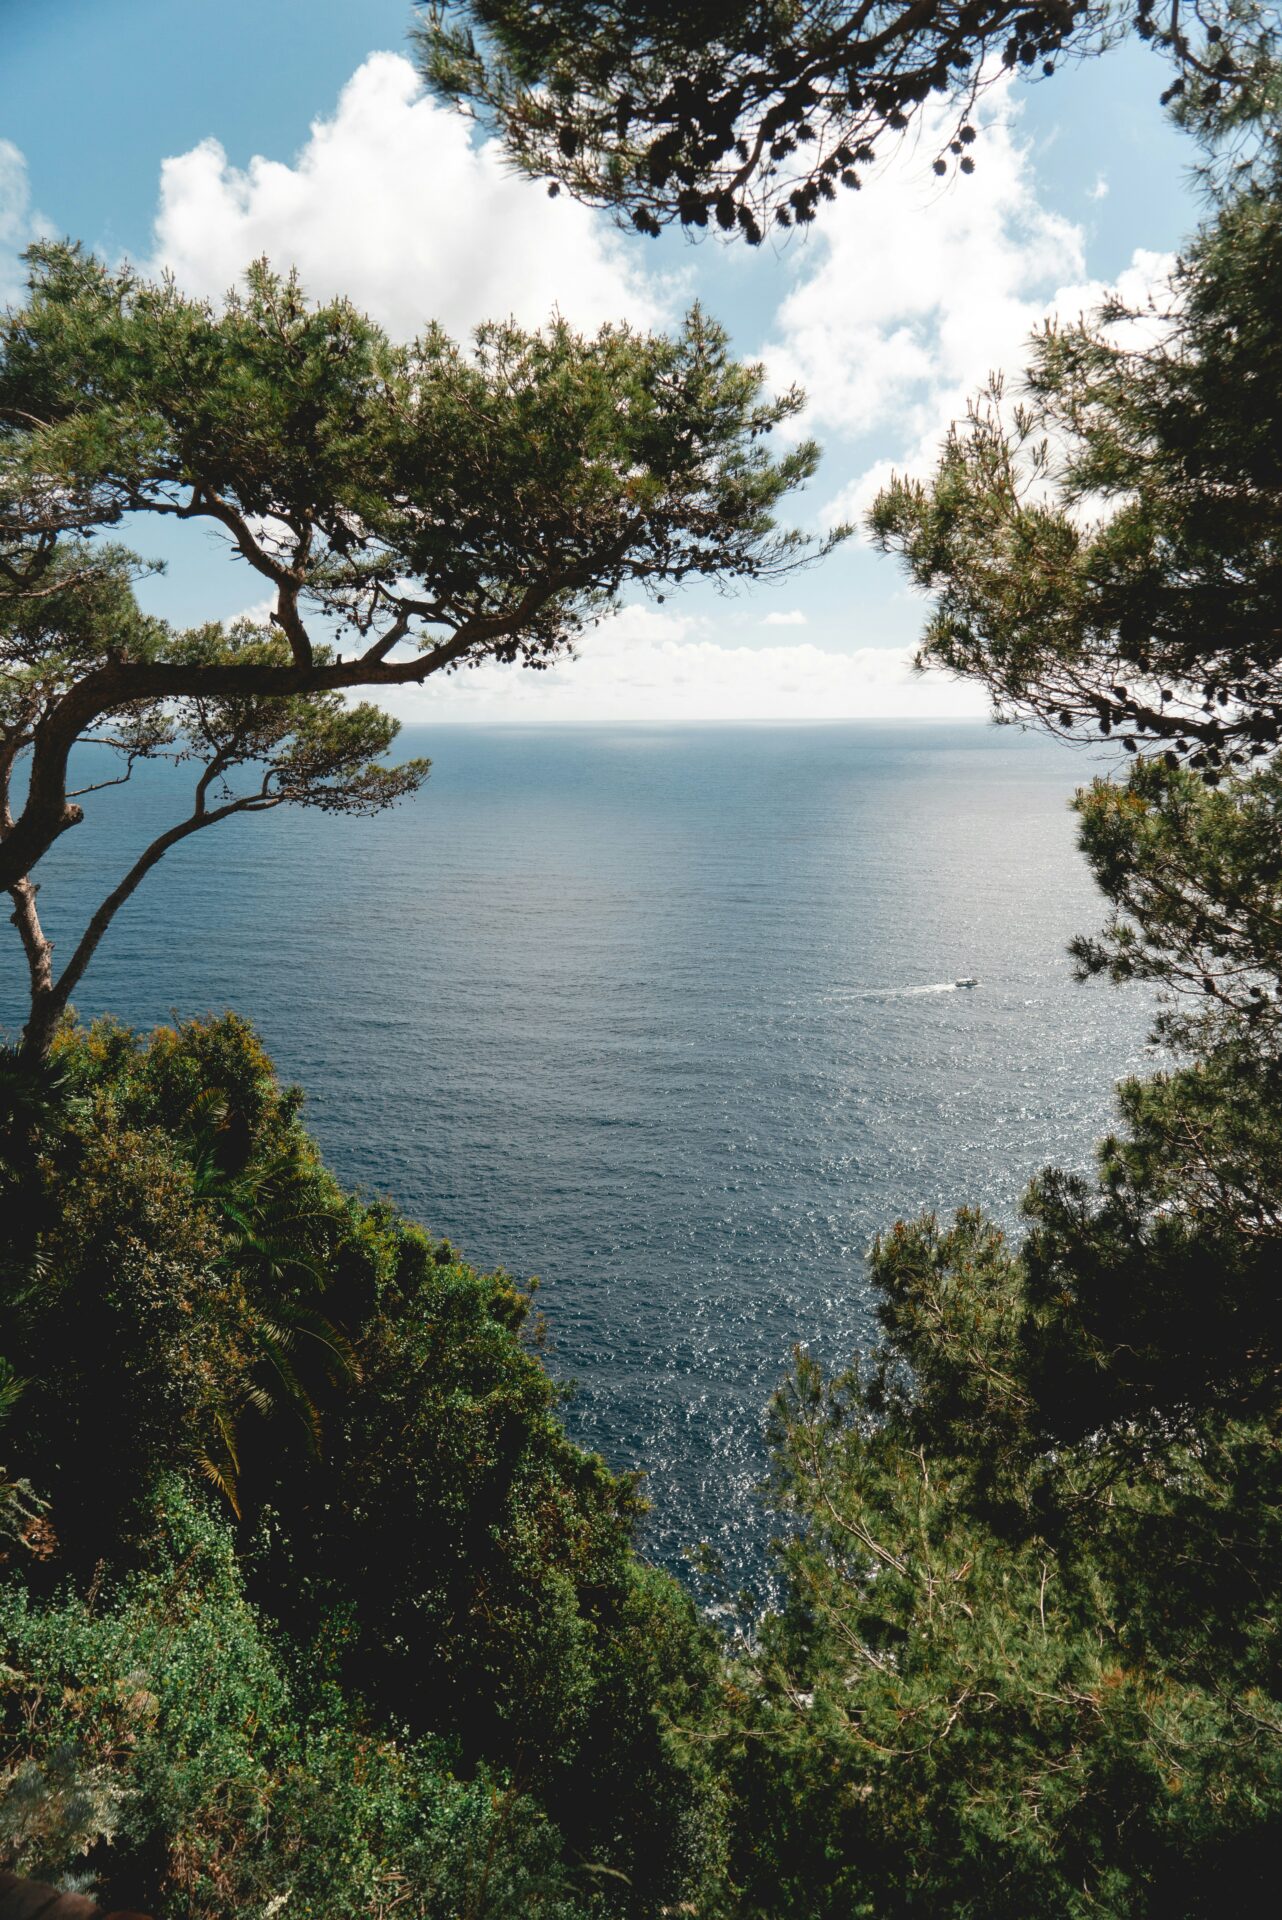 Mediterranean trees with branches forming a someone circular shape with a view of the water